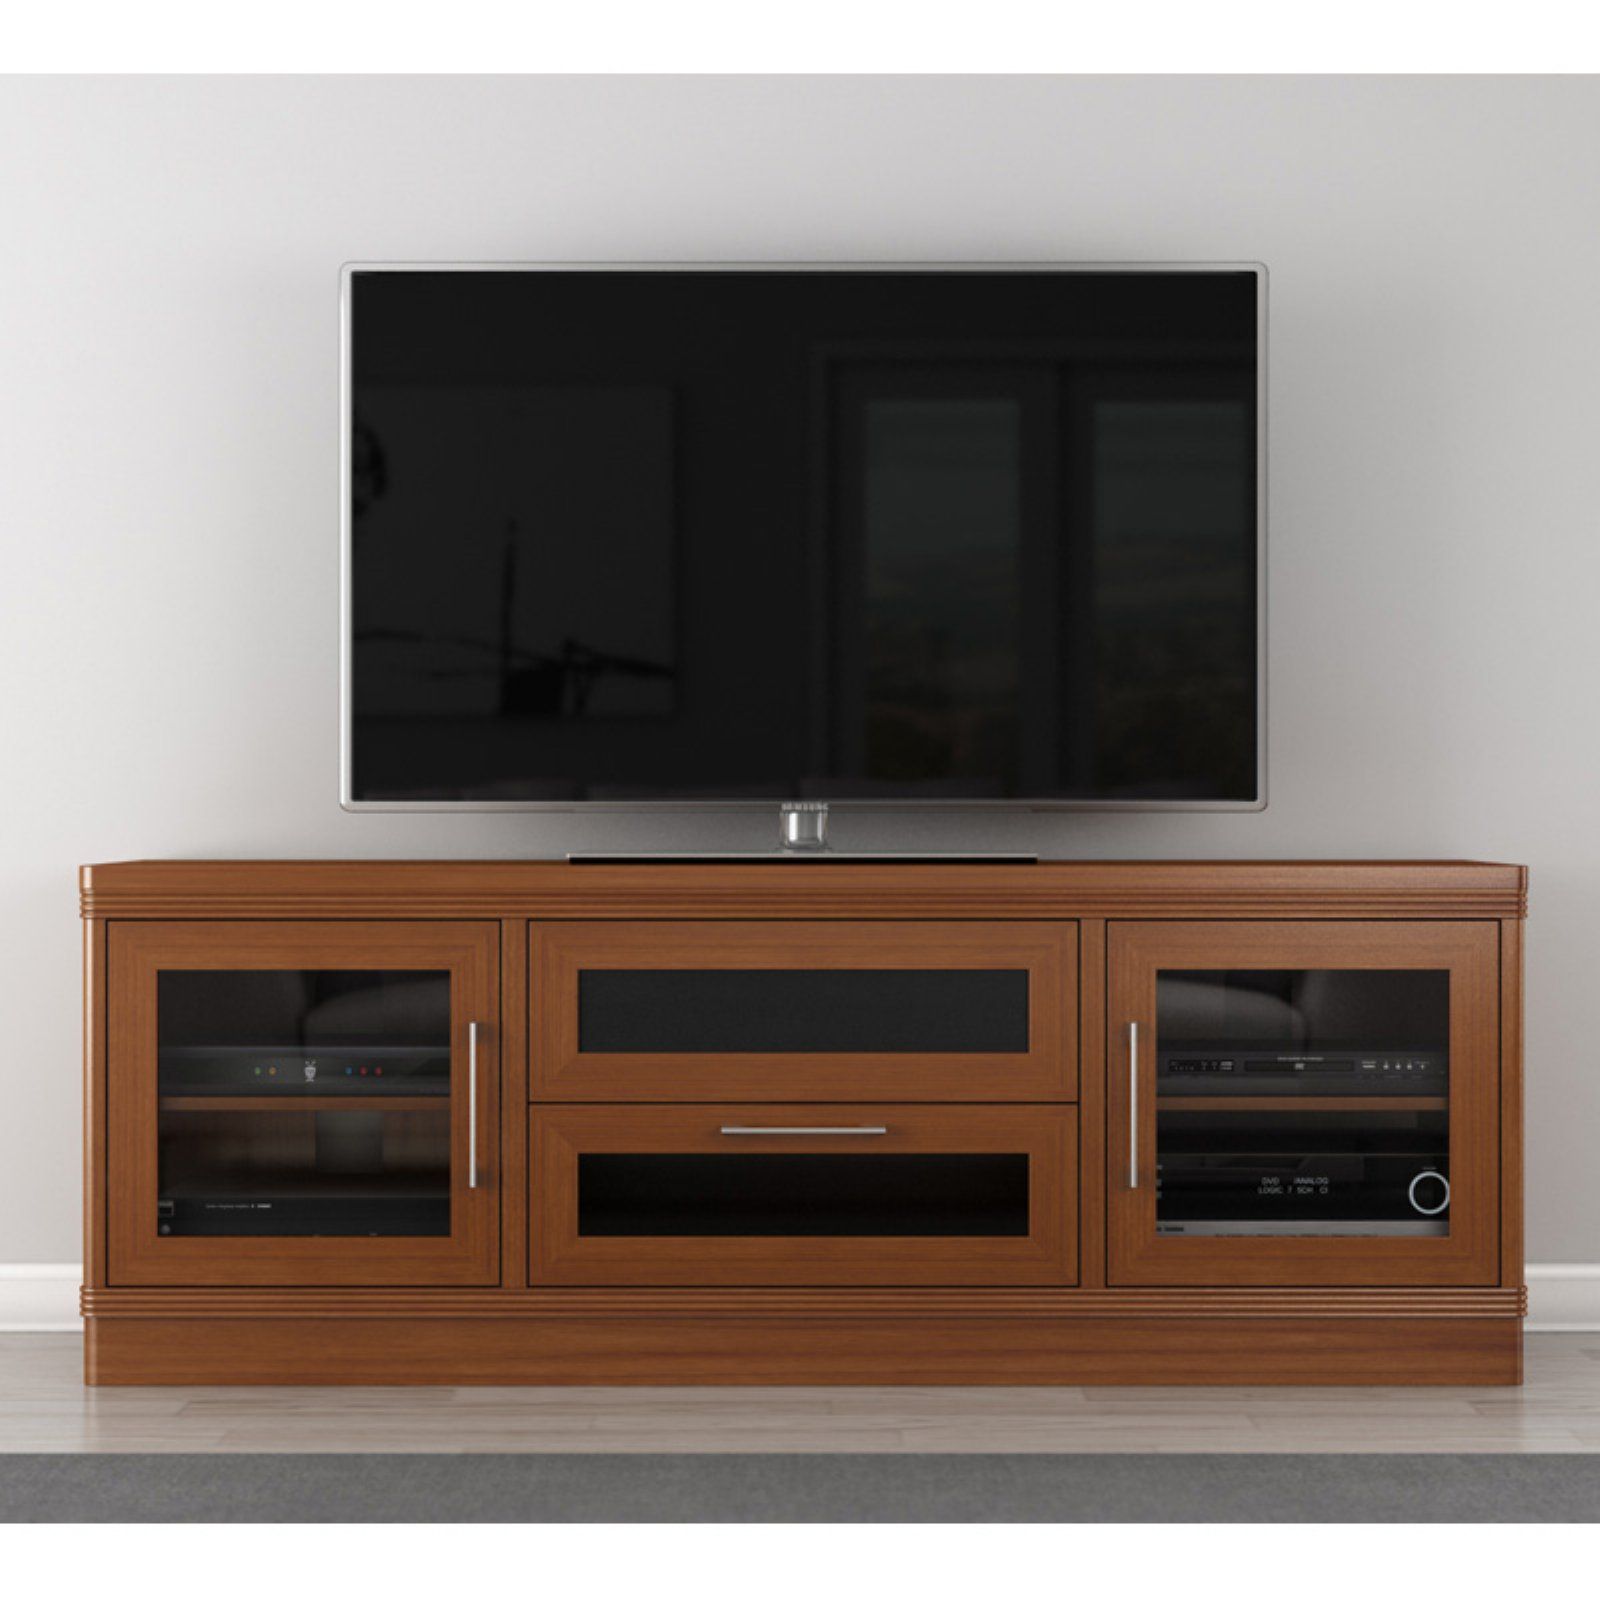 Furnitech Transitional 70 Inch Tv Stand – Walmart Pertaining To Mainor Tv Stands For Tvs Up To 70" (View 11 of 15)